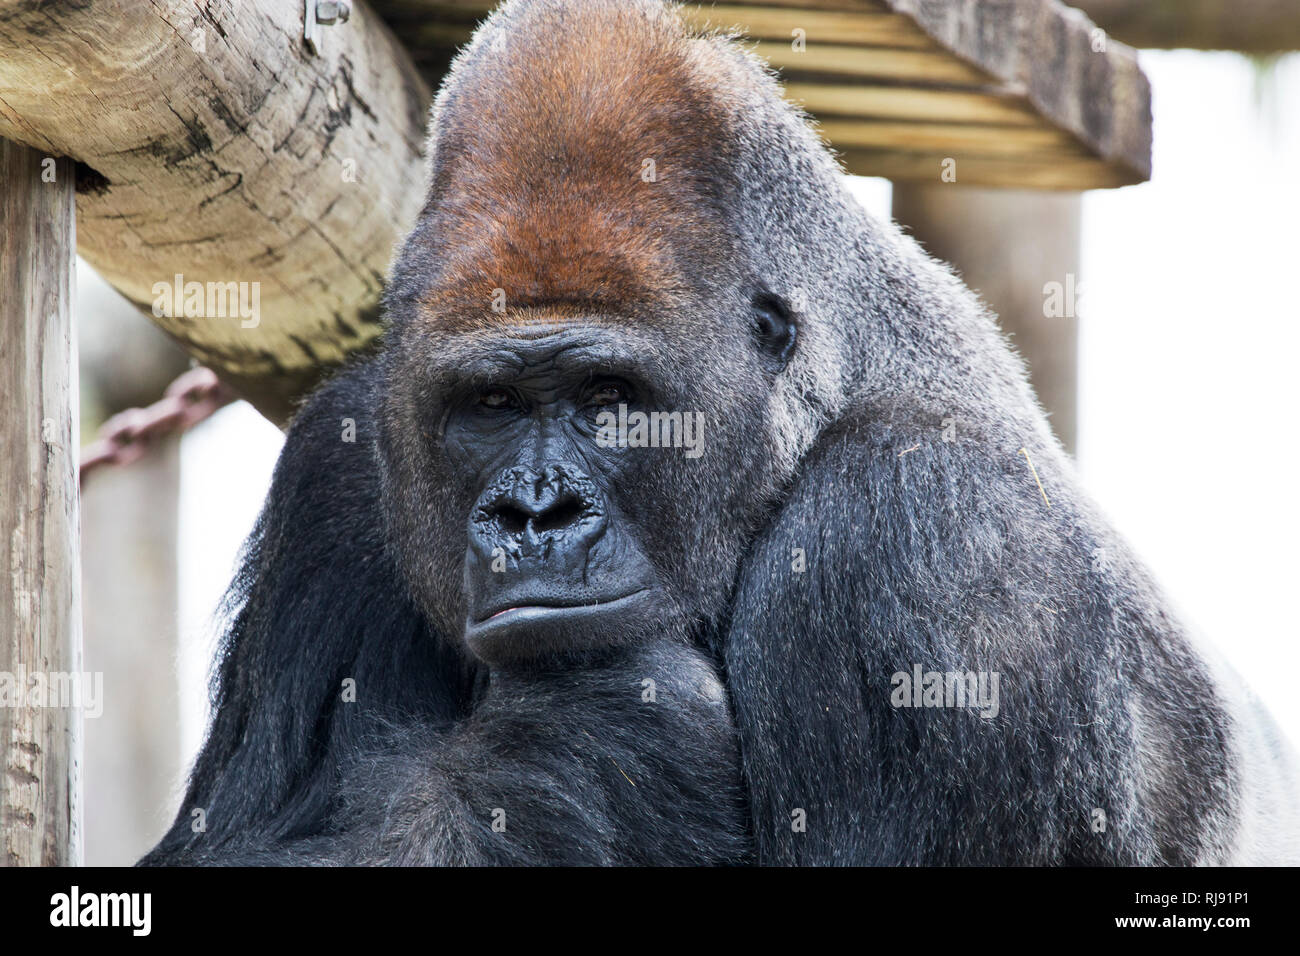 Gorilla at the Zoo in Brownsville Texas Stock Photo